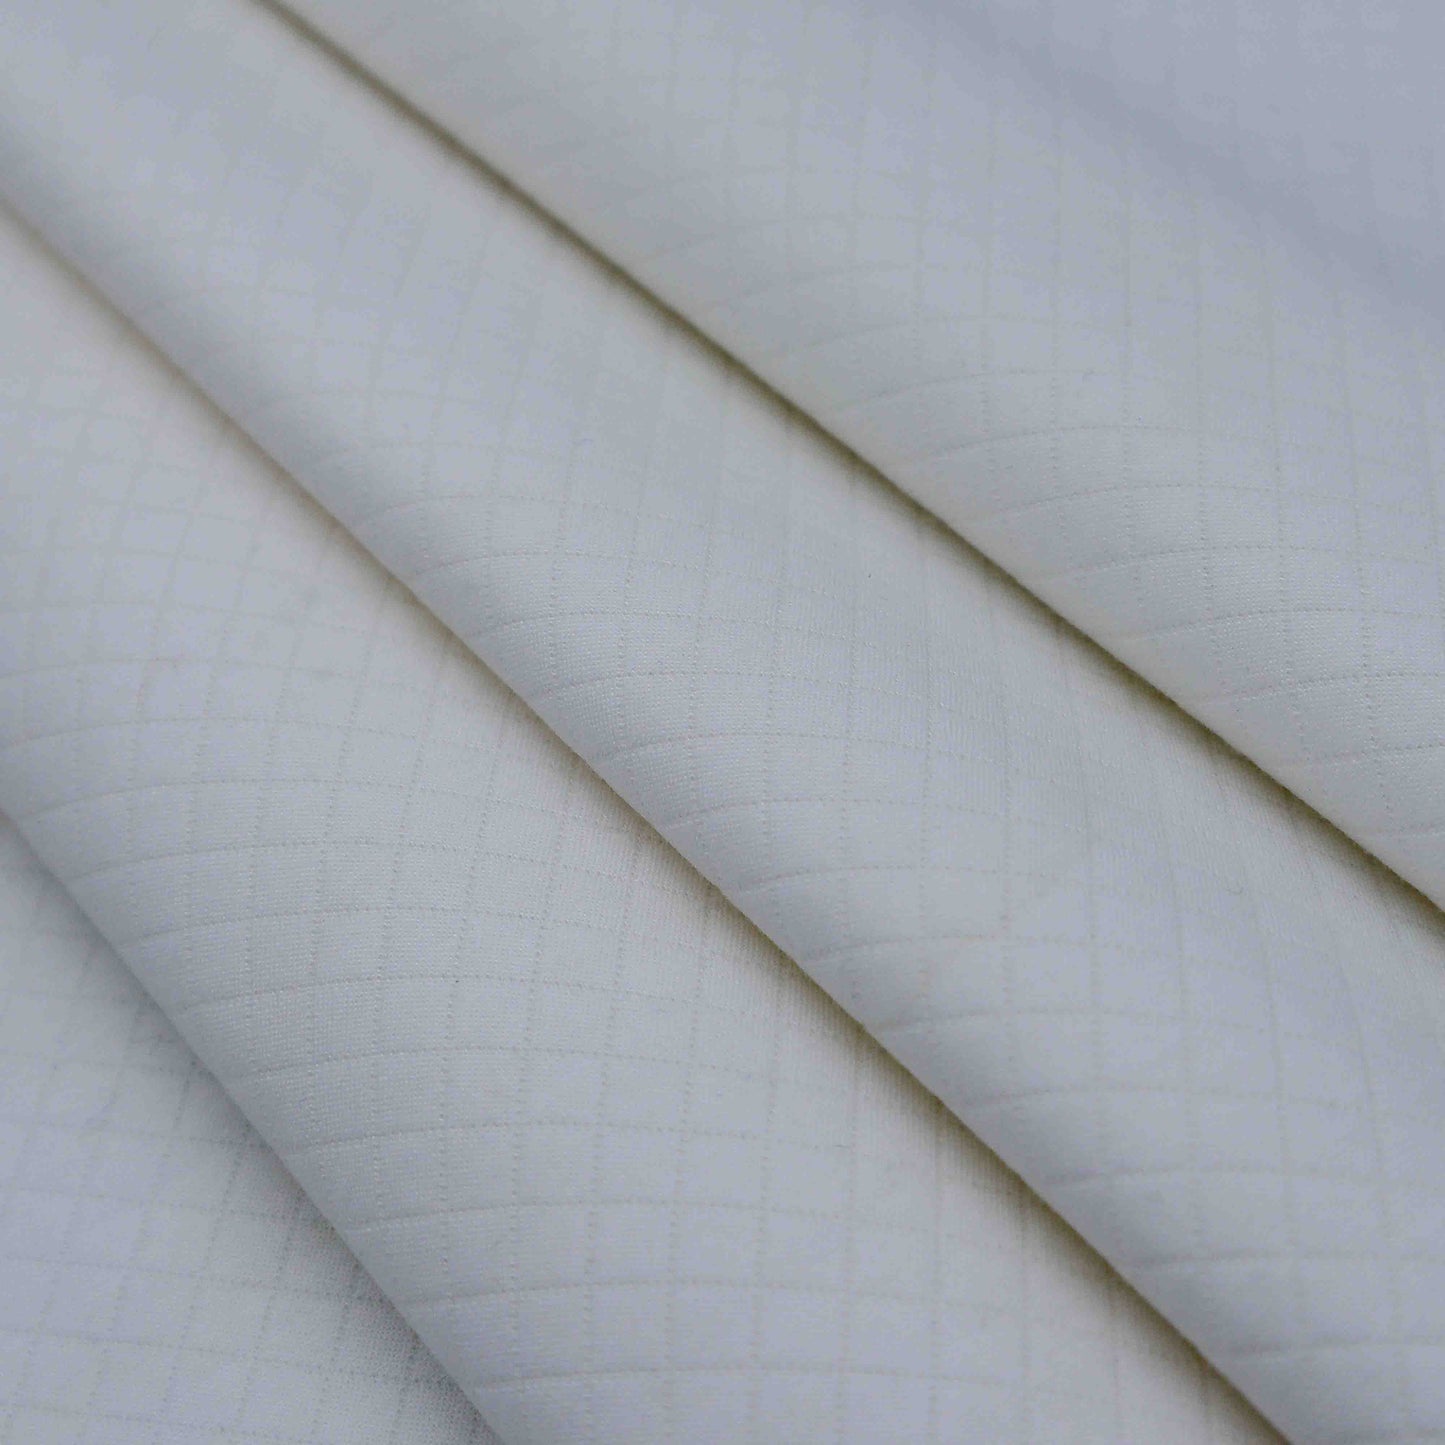 A mid-weight textured fabric in Porcelain. This fabric has a quilt look-a-like texture to it and is stretchable due to the spandex blend in fabric composition. It is breathable despite its weight.